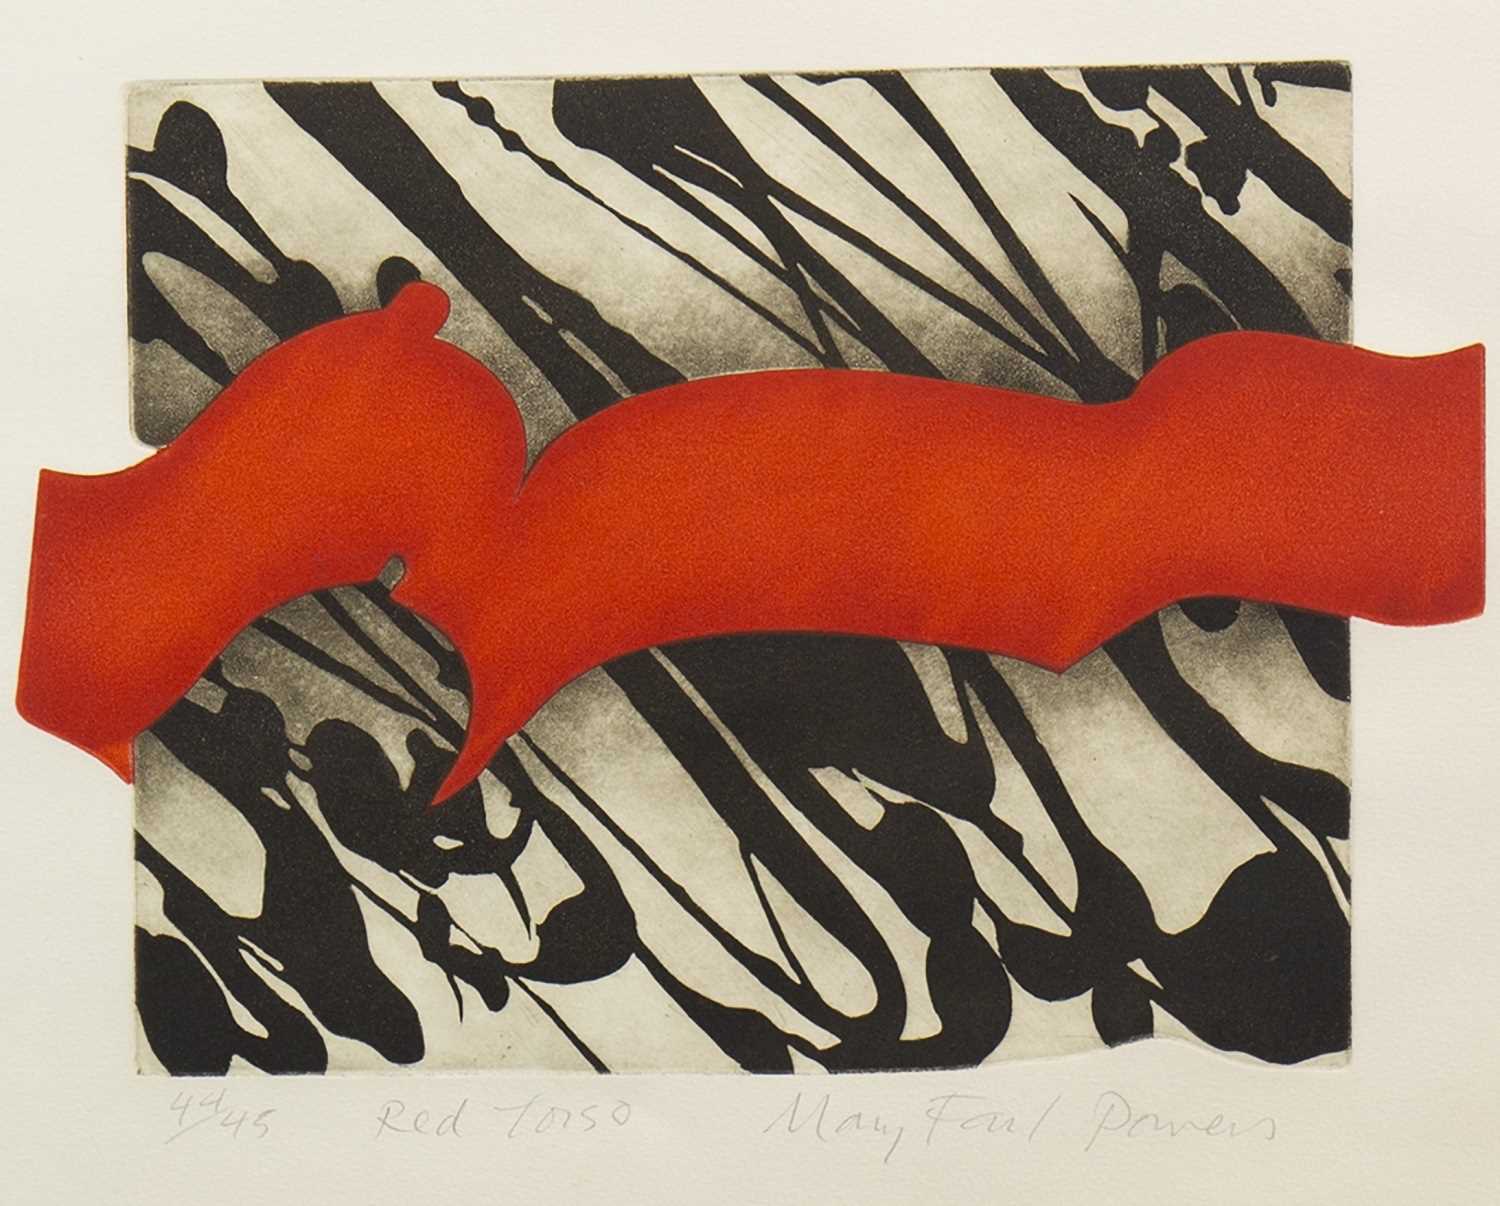 Lot 724 - RED TORSO, AN ETCHING BY MARY FARL POWERS